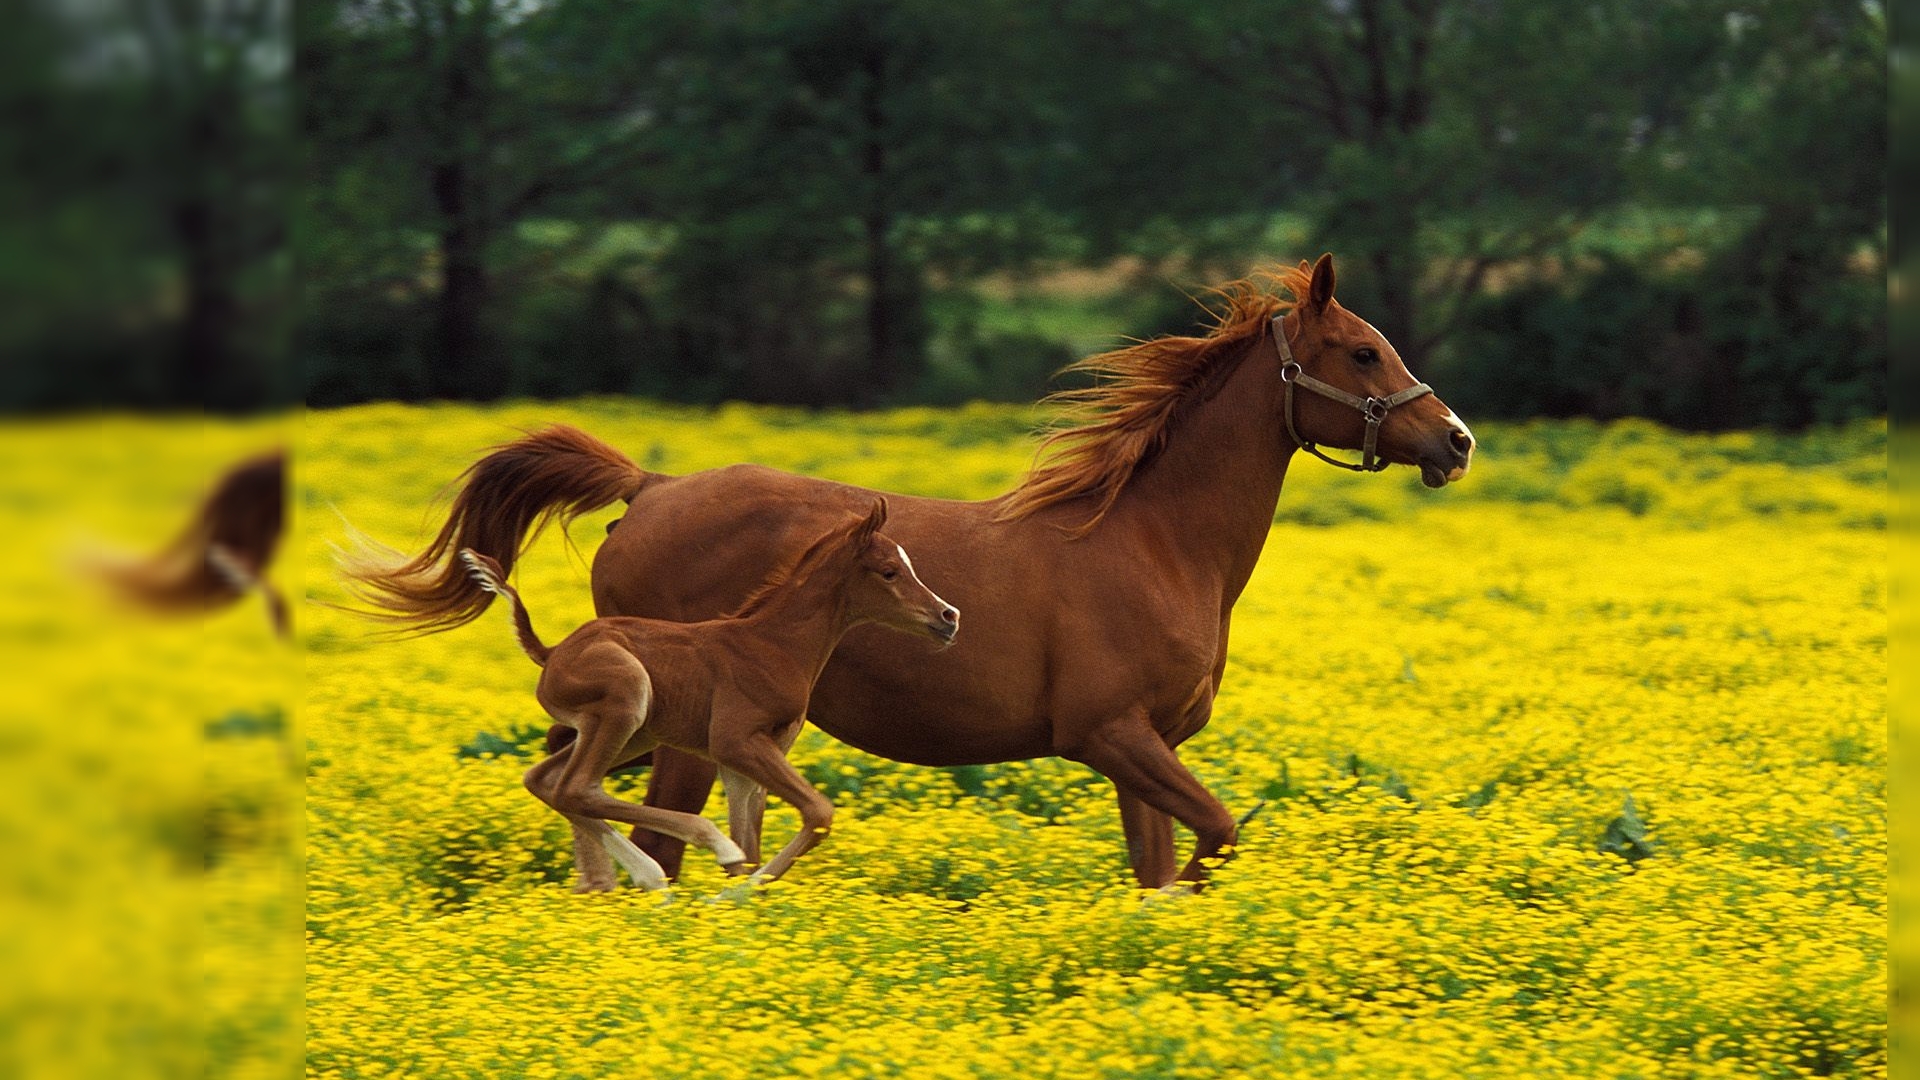 Baby Horse Background HD Wallpaper